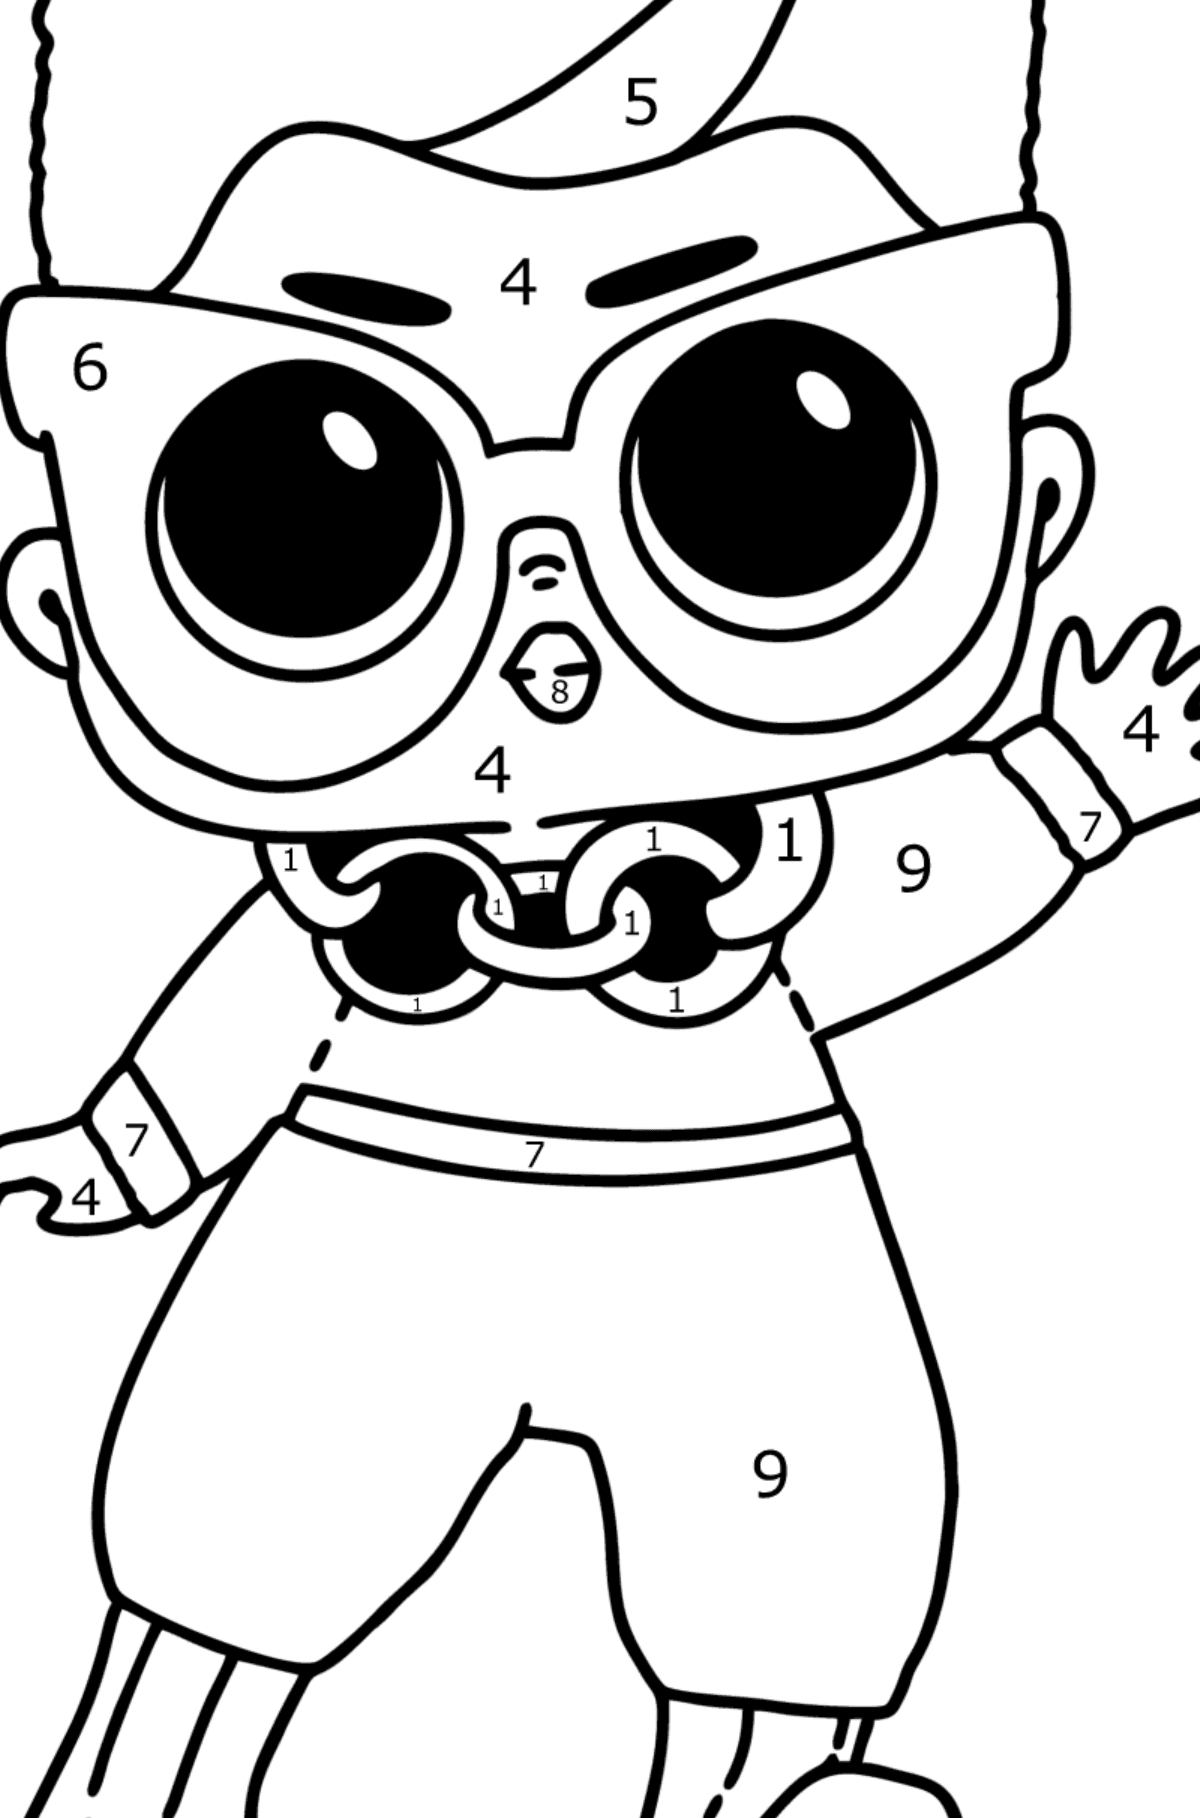 LOL Surprise Swaggie Doll Boy coloring page - Coloring by Numbers for Kids